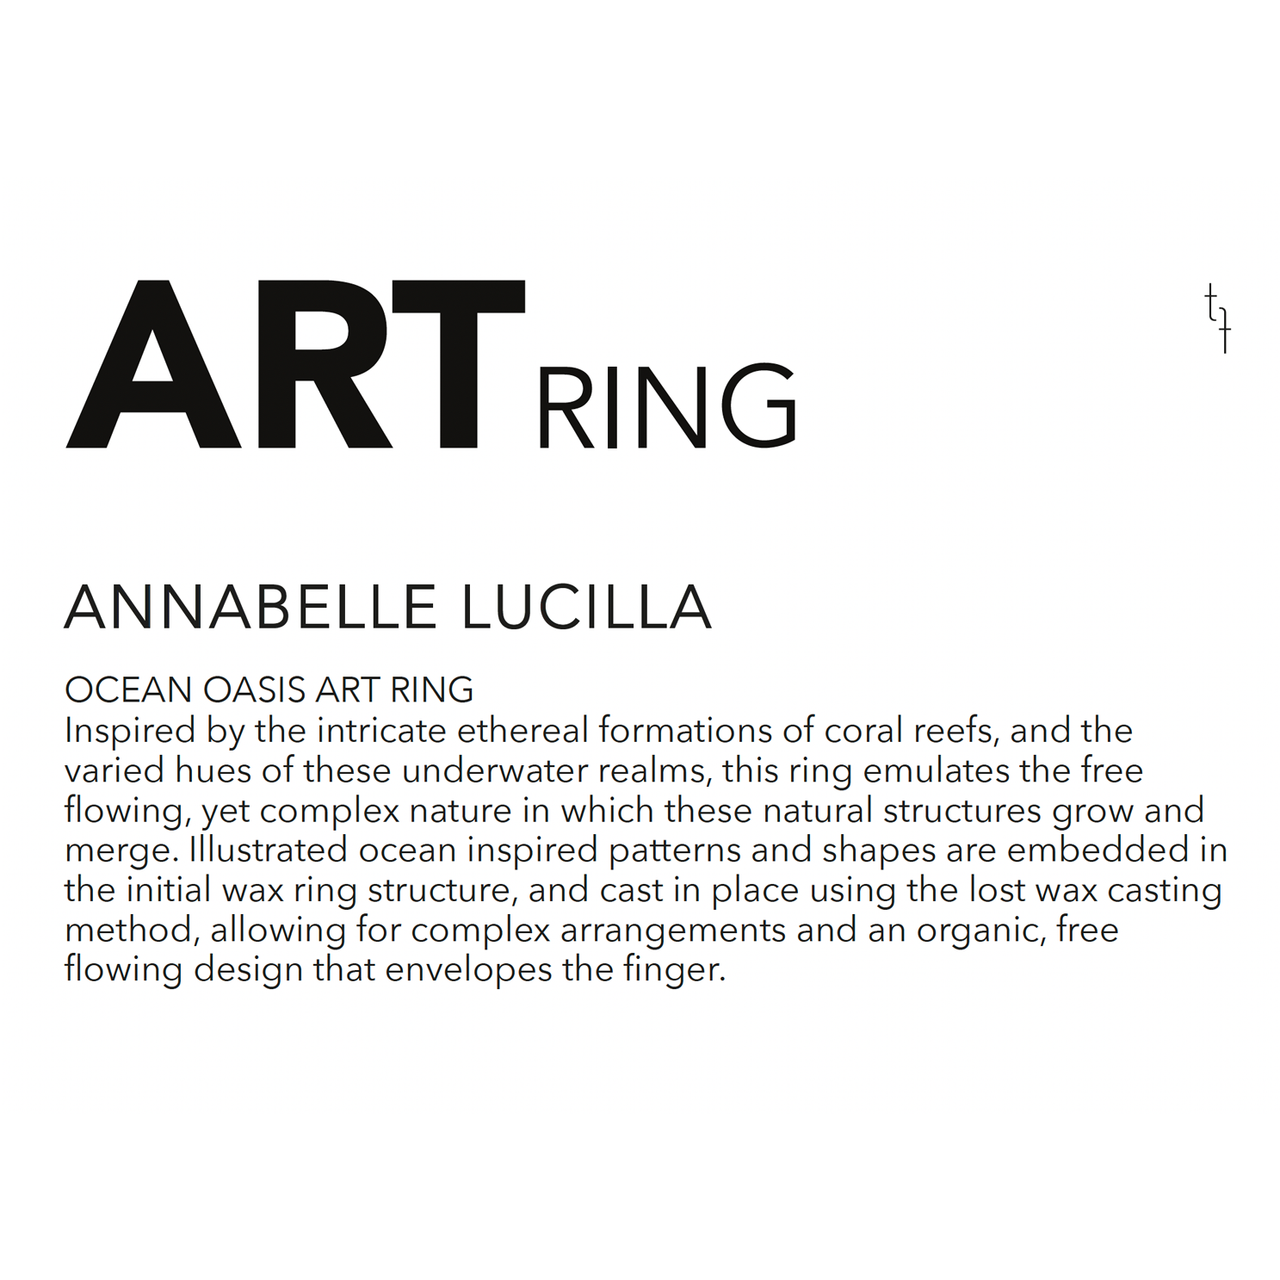 Ocean Oasis Art Ring by Annabelle Lucilla available at tomfoolery London as a part of Art Ring 2023 exhibition.